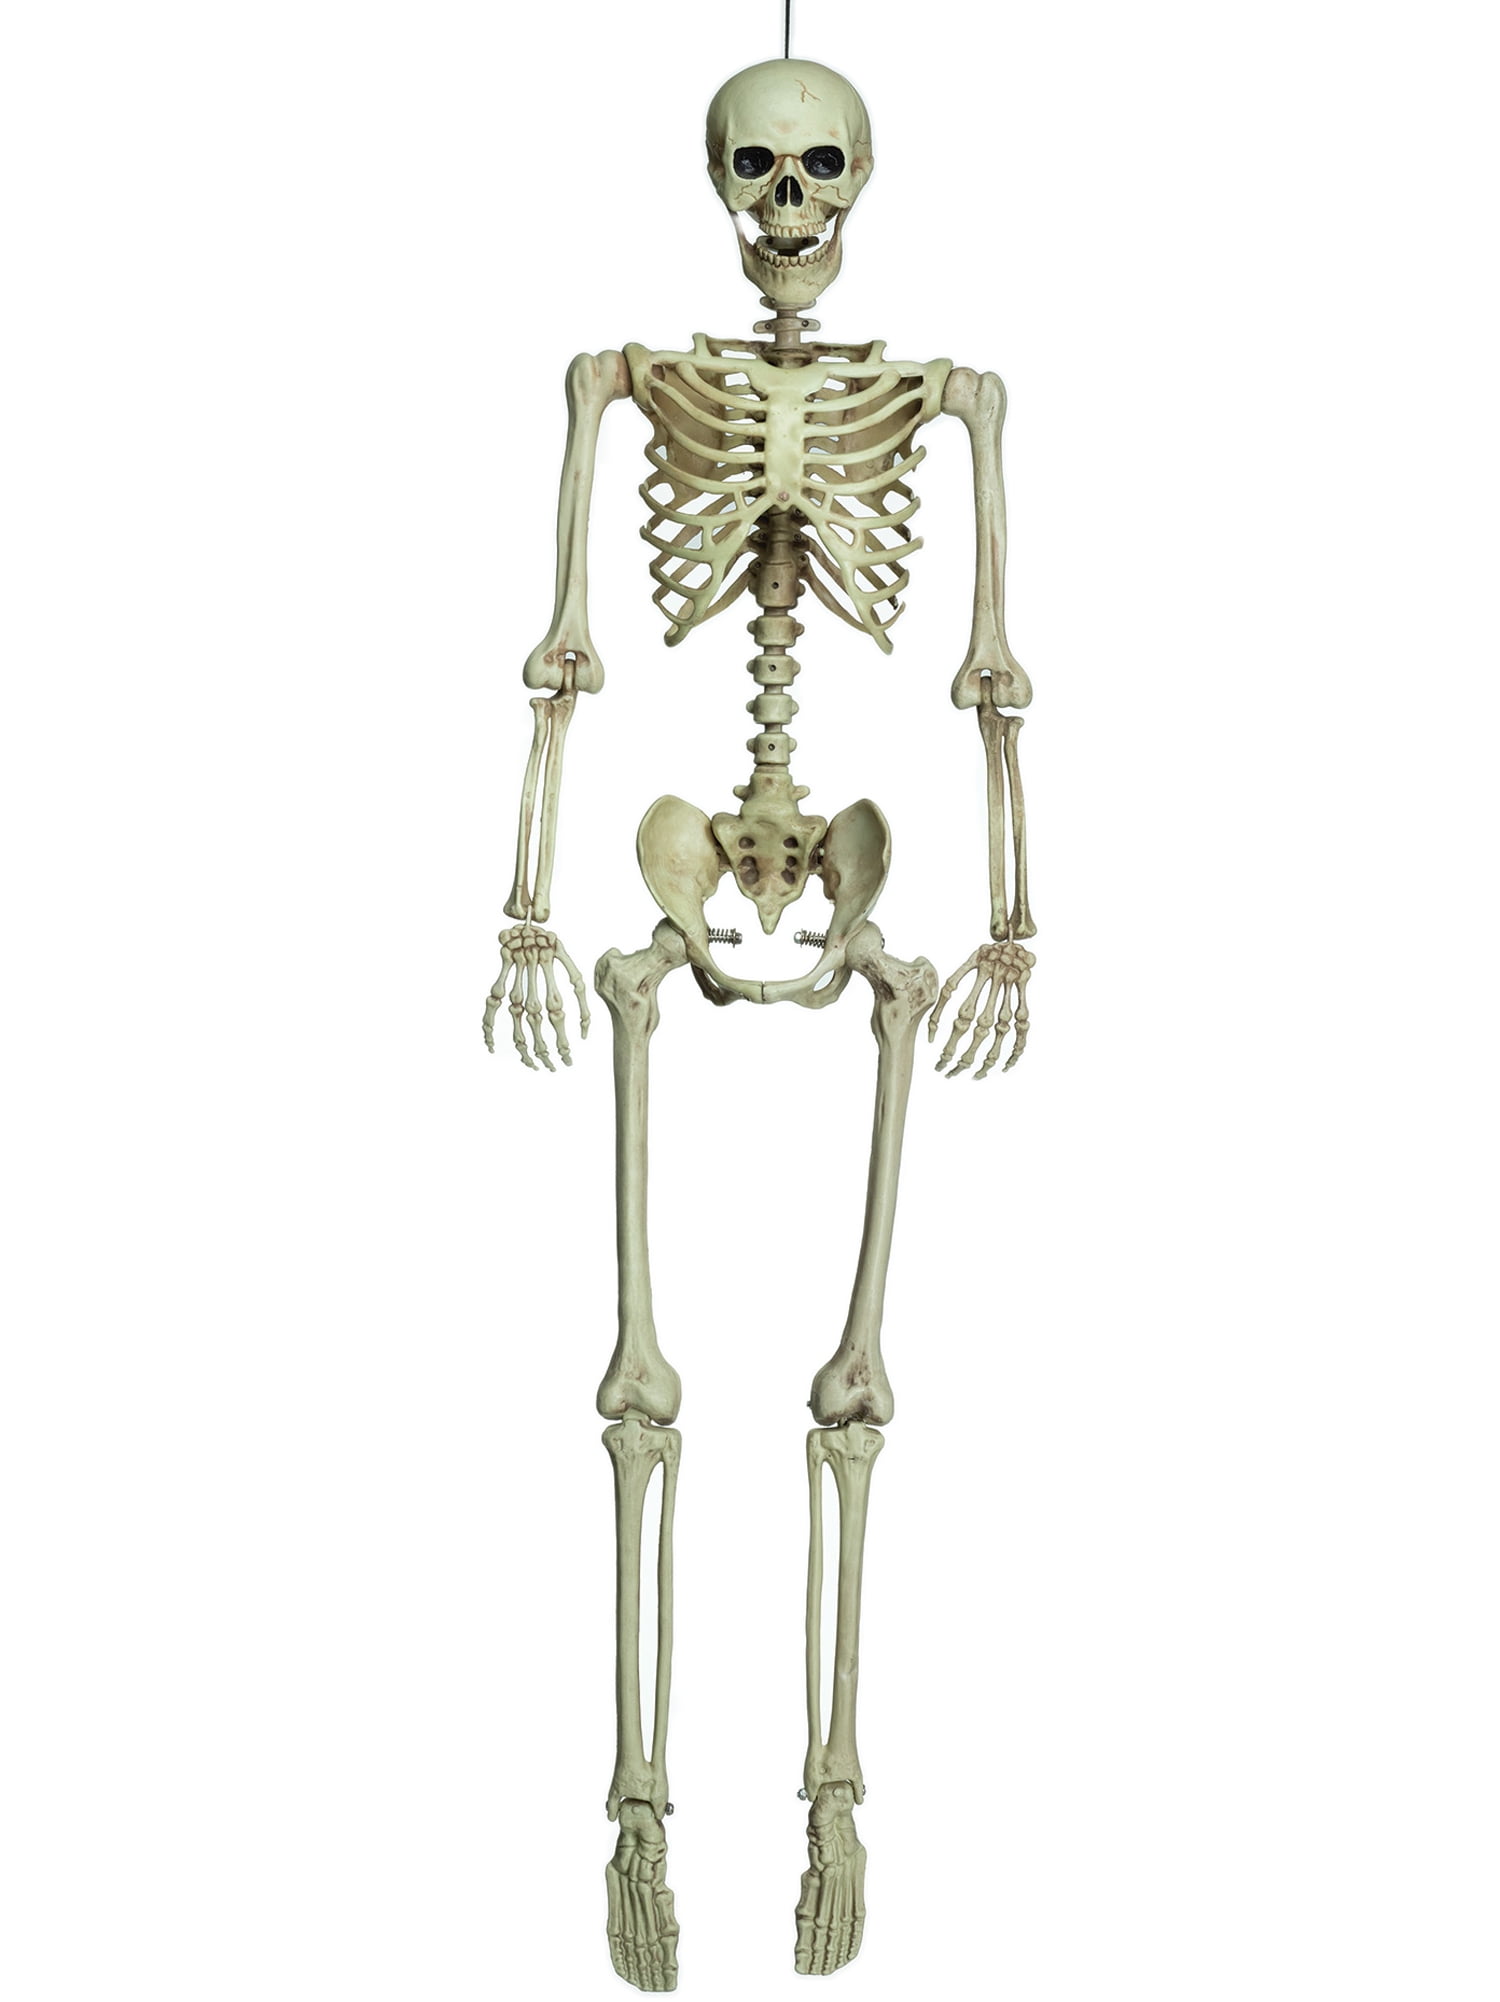 Product Works 60-Inch Pro-Line Animotion Skeleton Halloween Decoration 